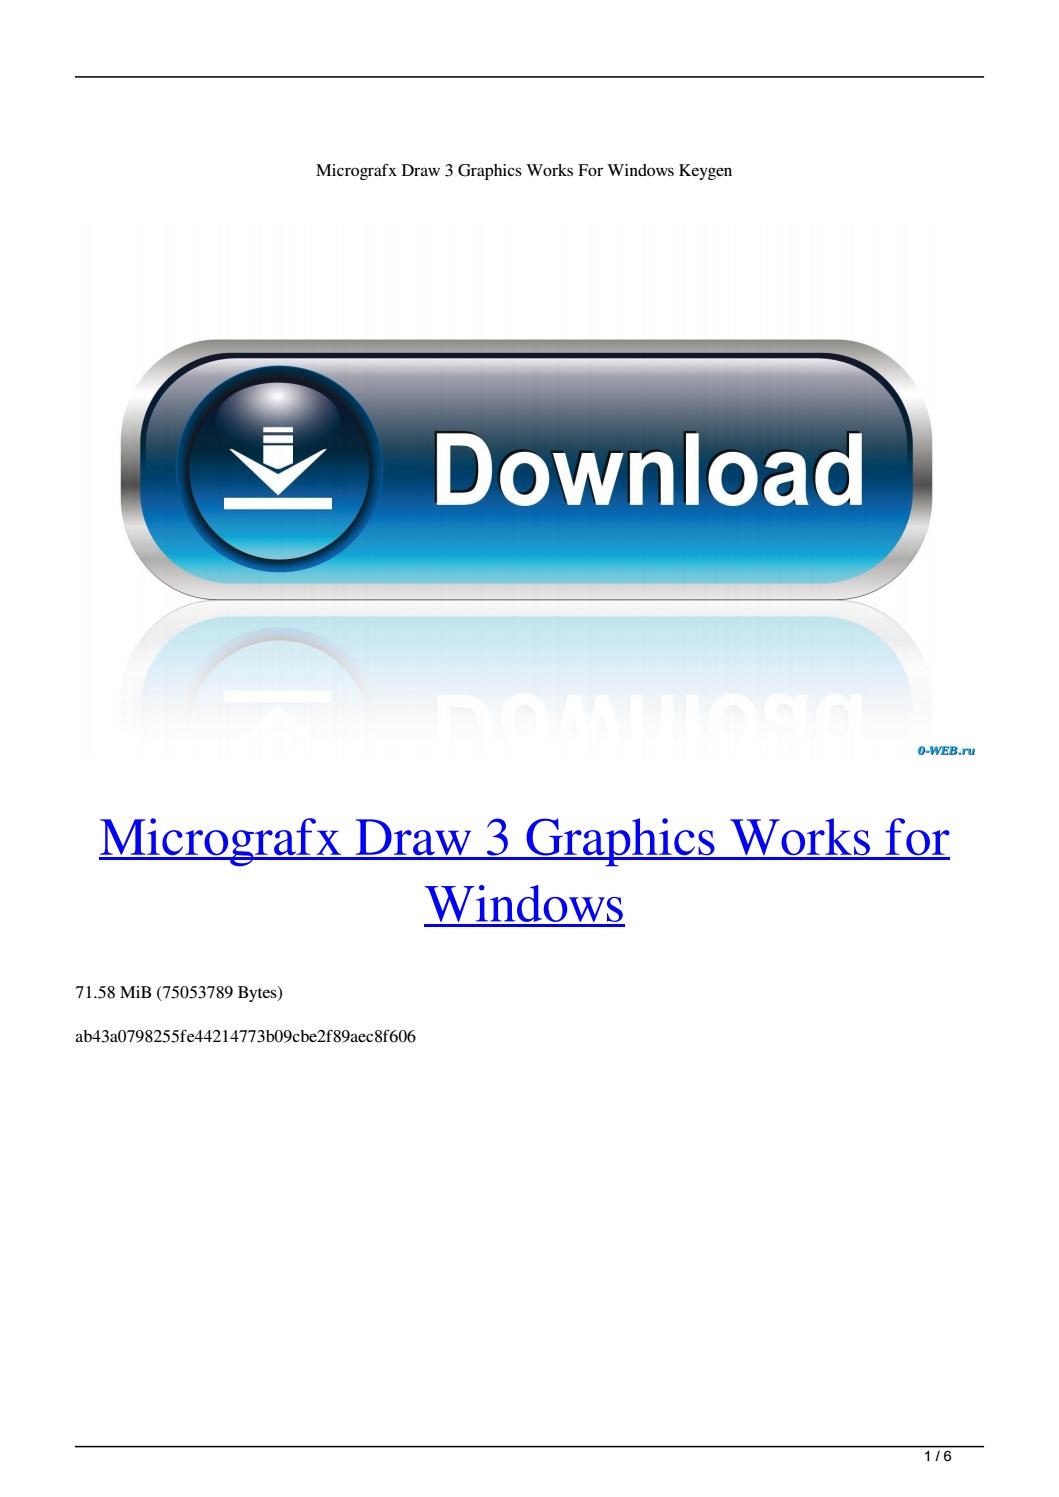 Micrografx picture publisher 9 free download